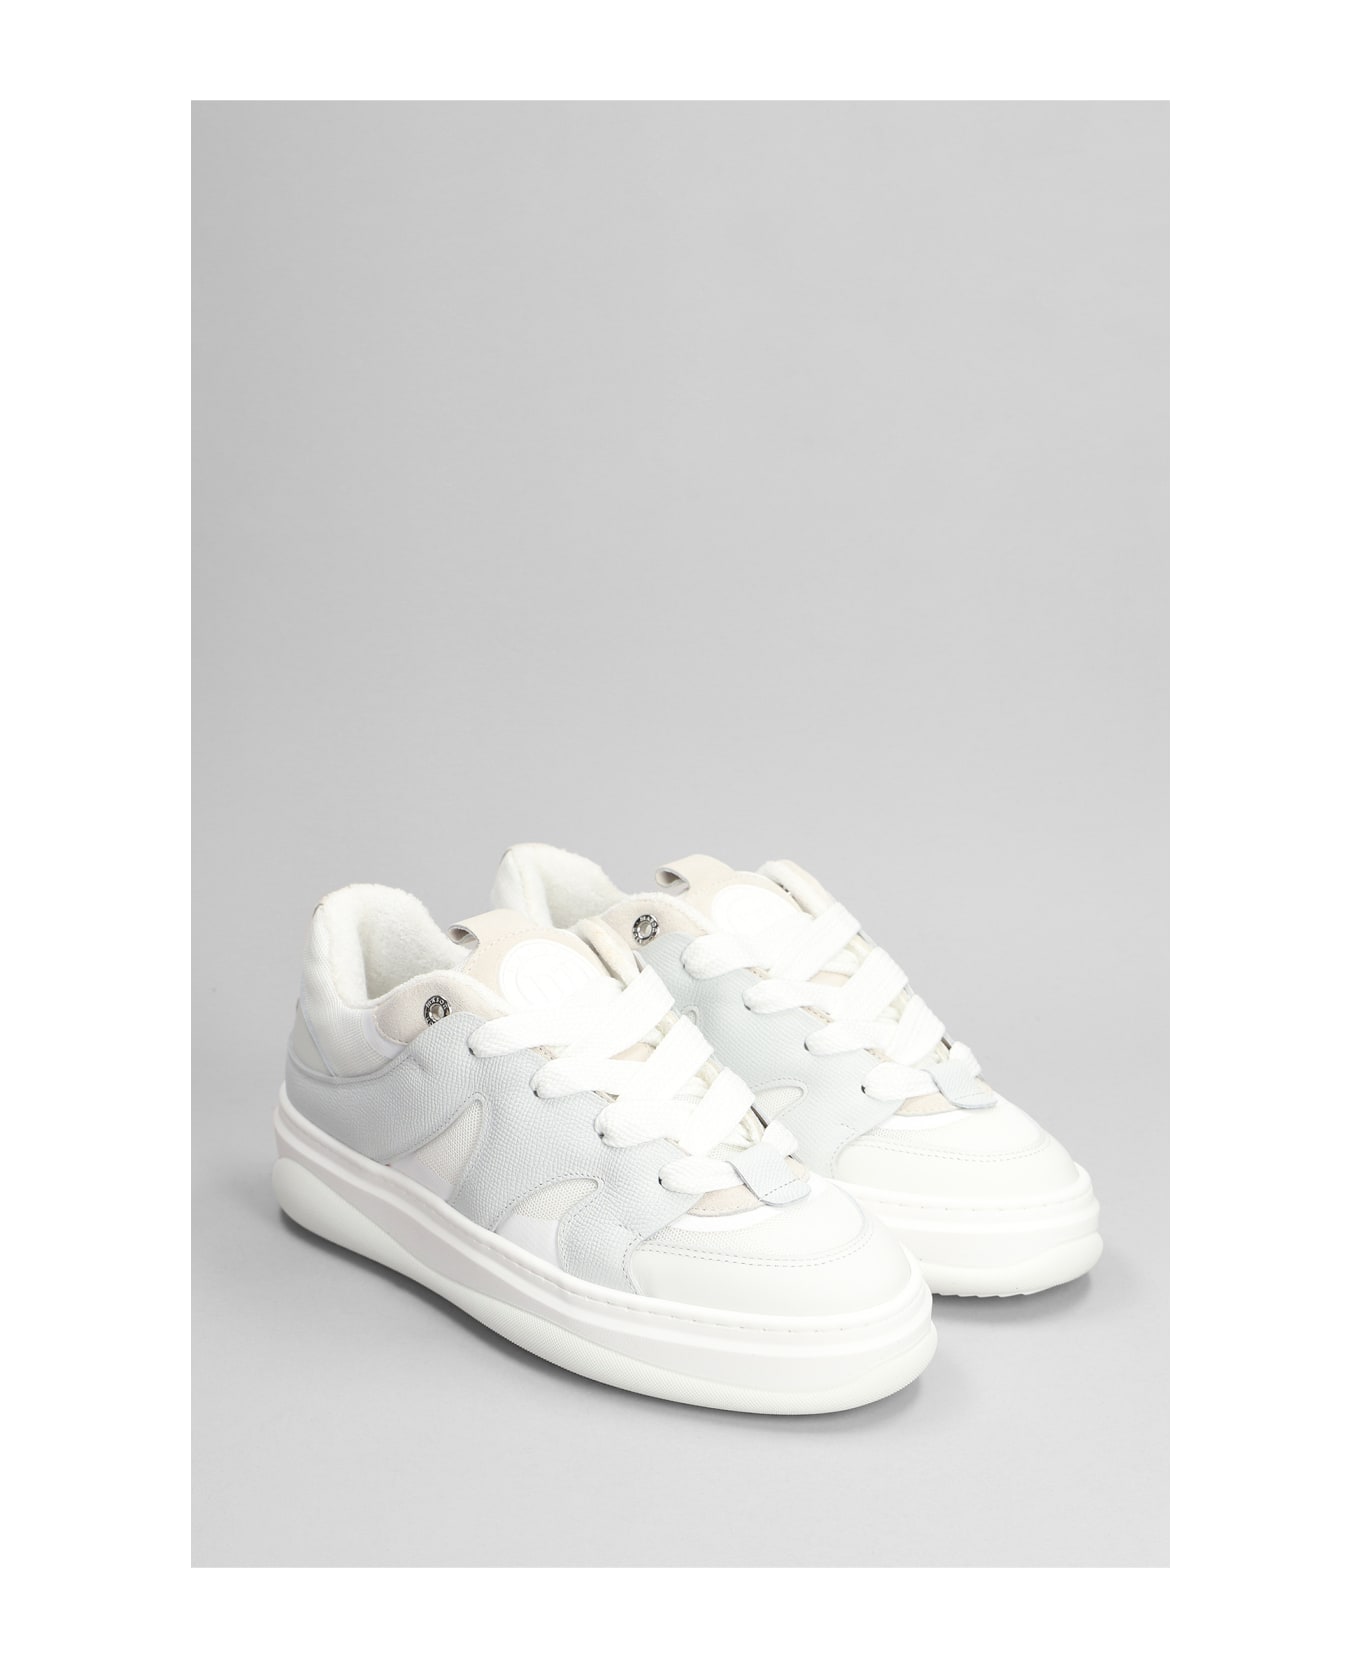 Mason Garments Venice Sneakers In White Suede And Fabric - white